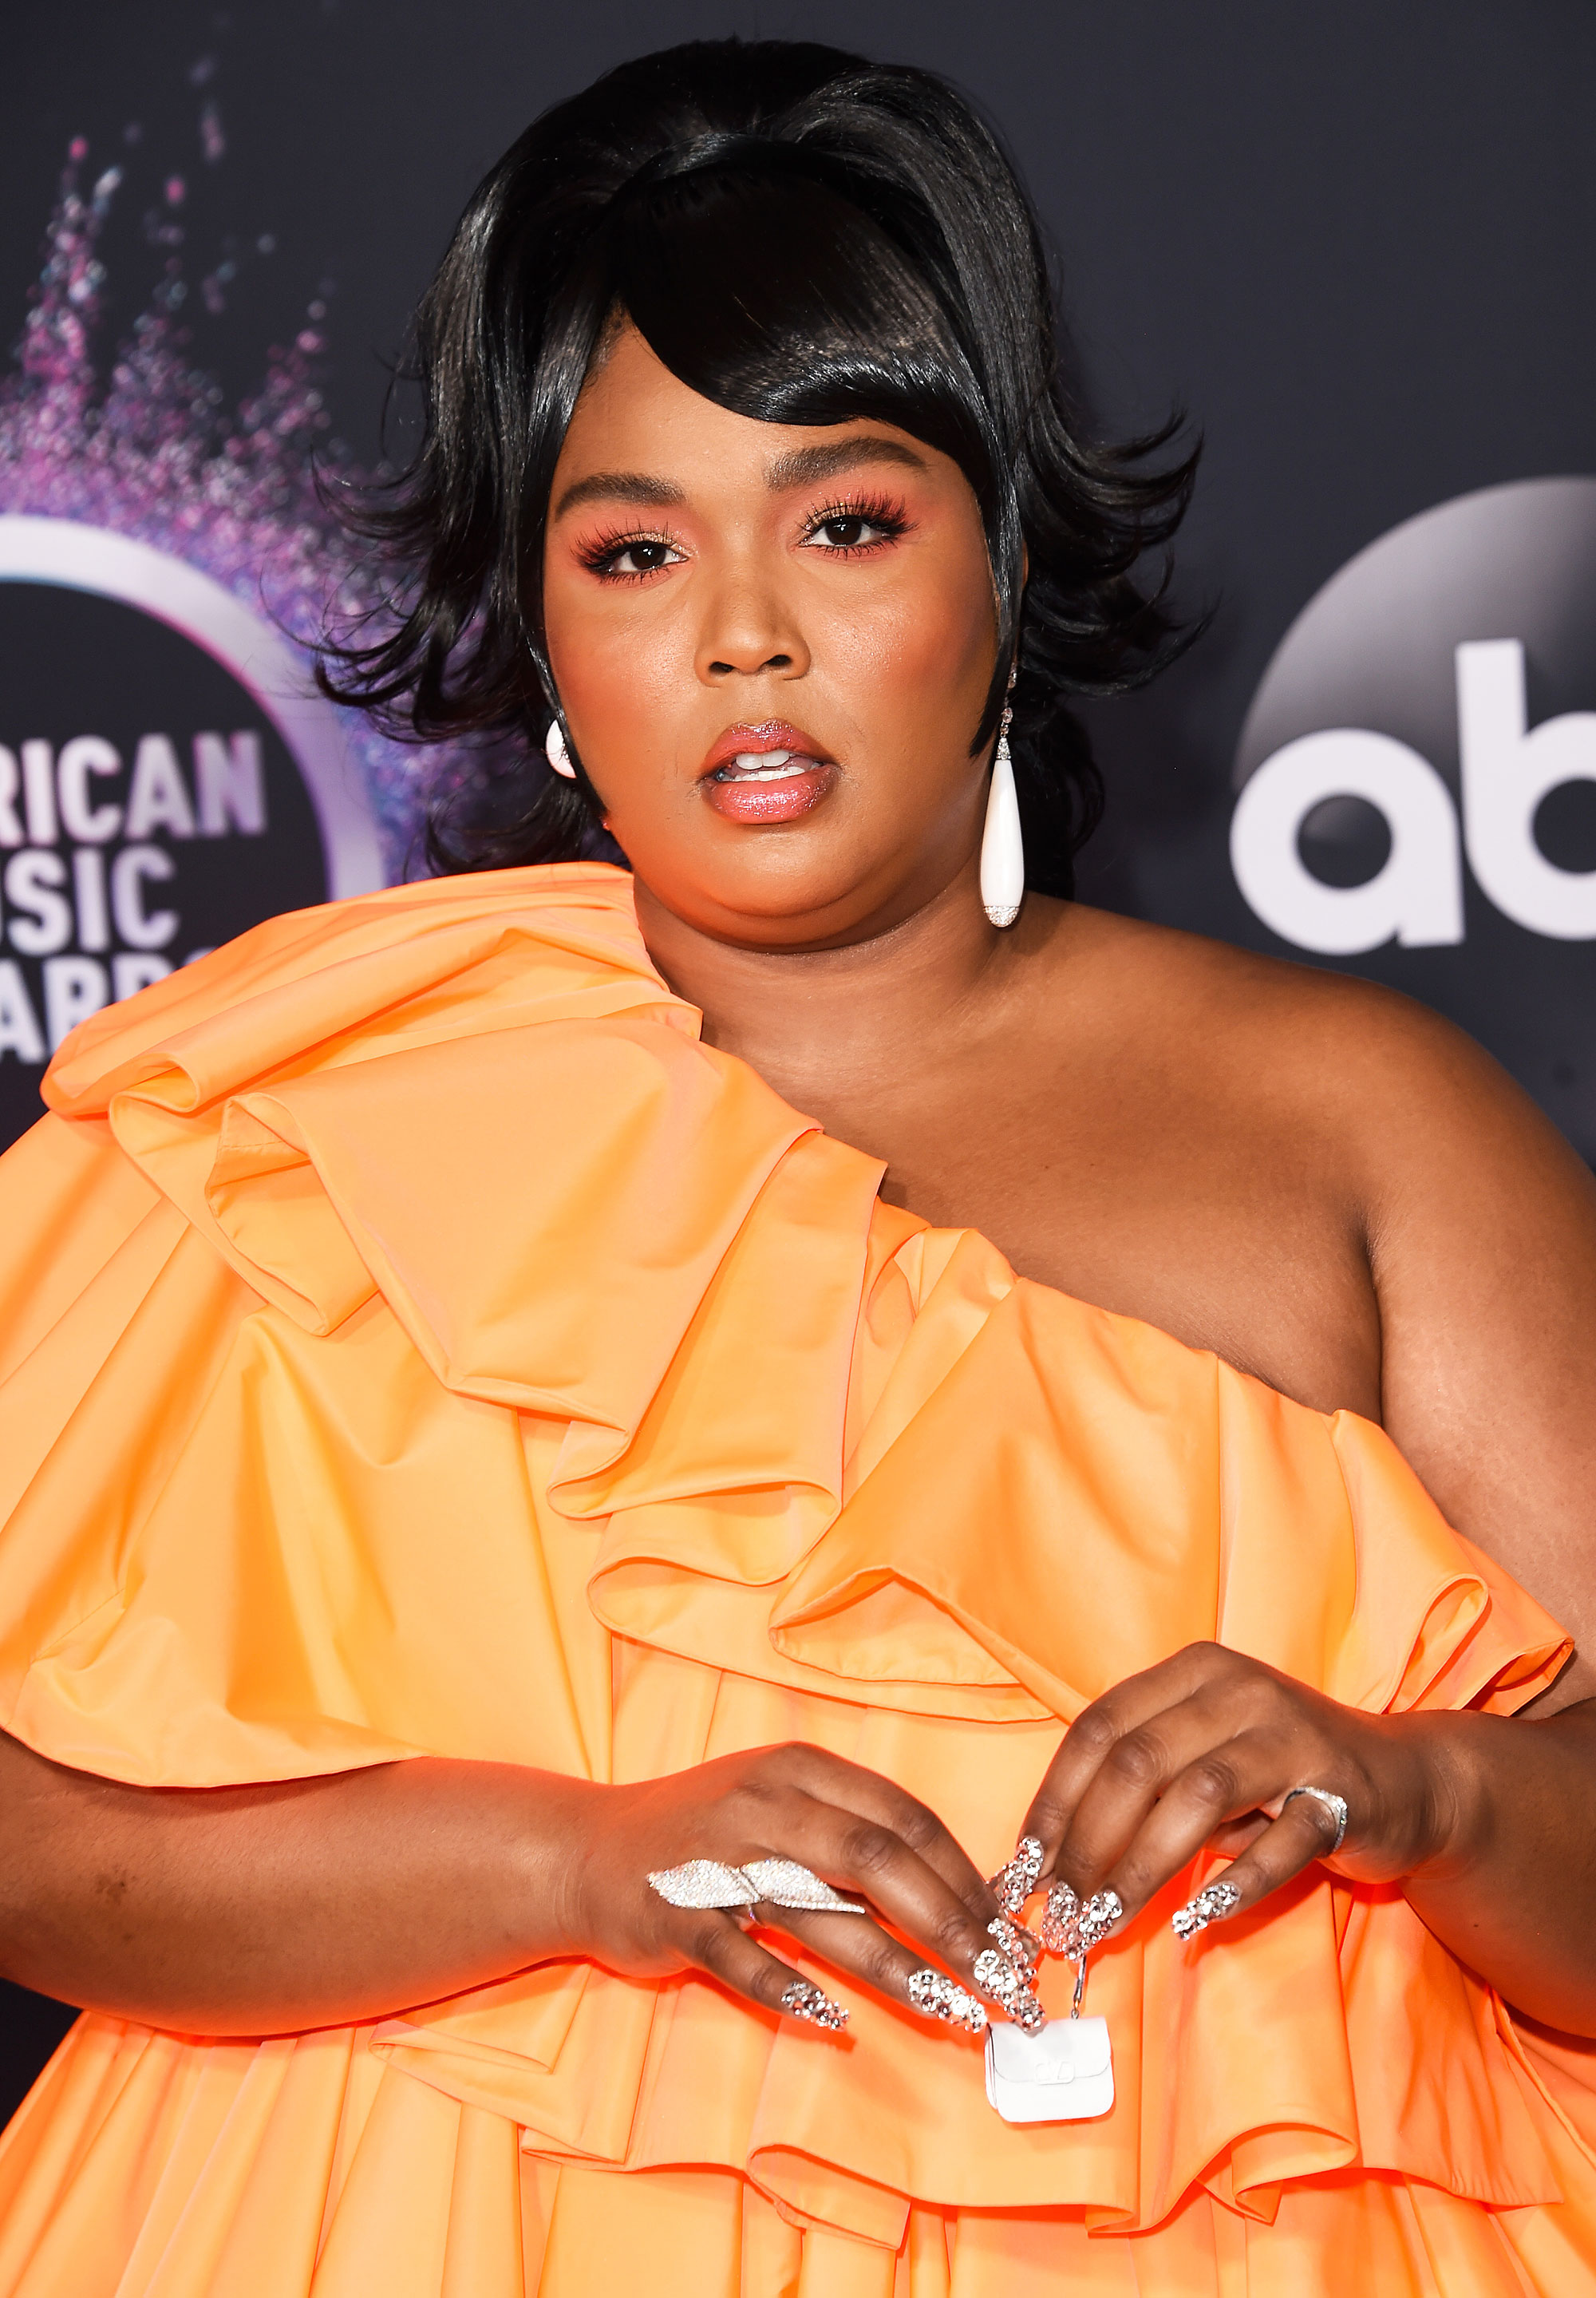 Lizzo Revealed the Contents of Her Famously Tiny Purse